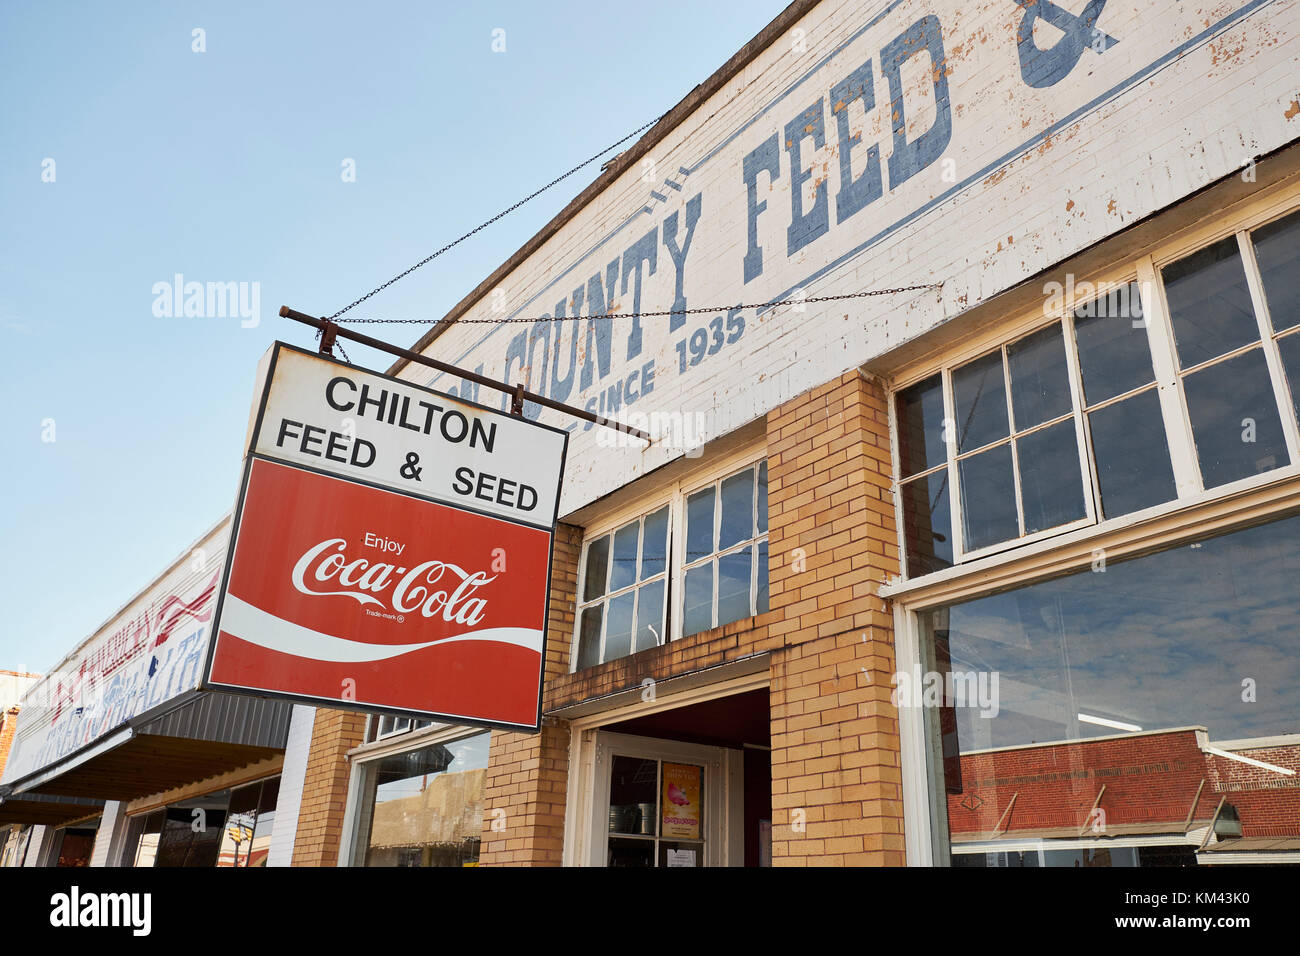 Rural Feed and Seed store or store front, in Chilton County, Clanton Alabama, USA. Stock Photo